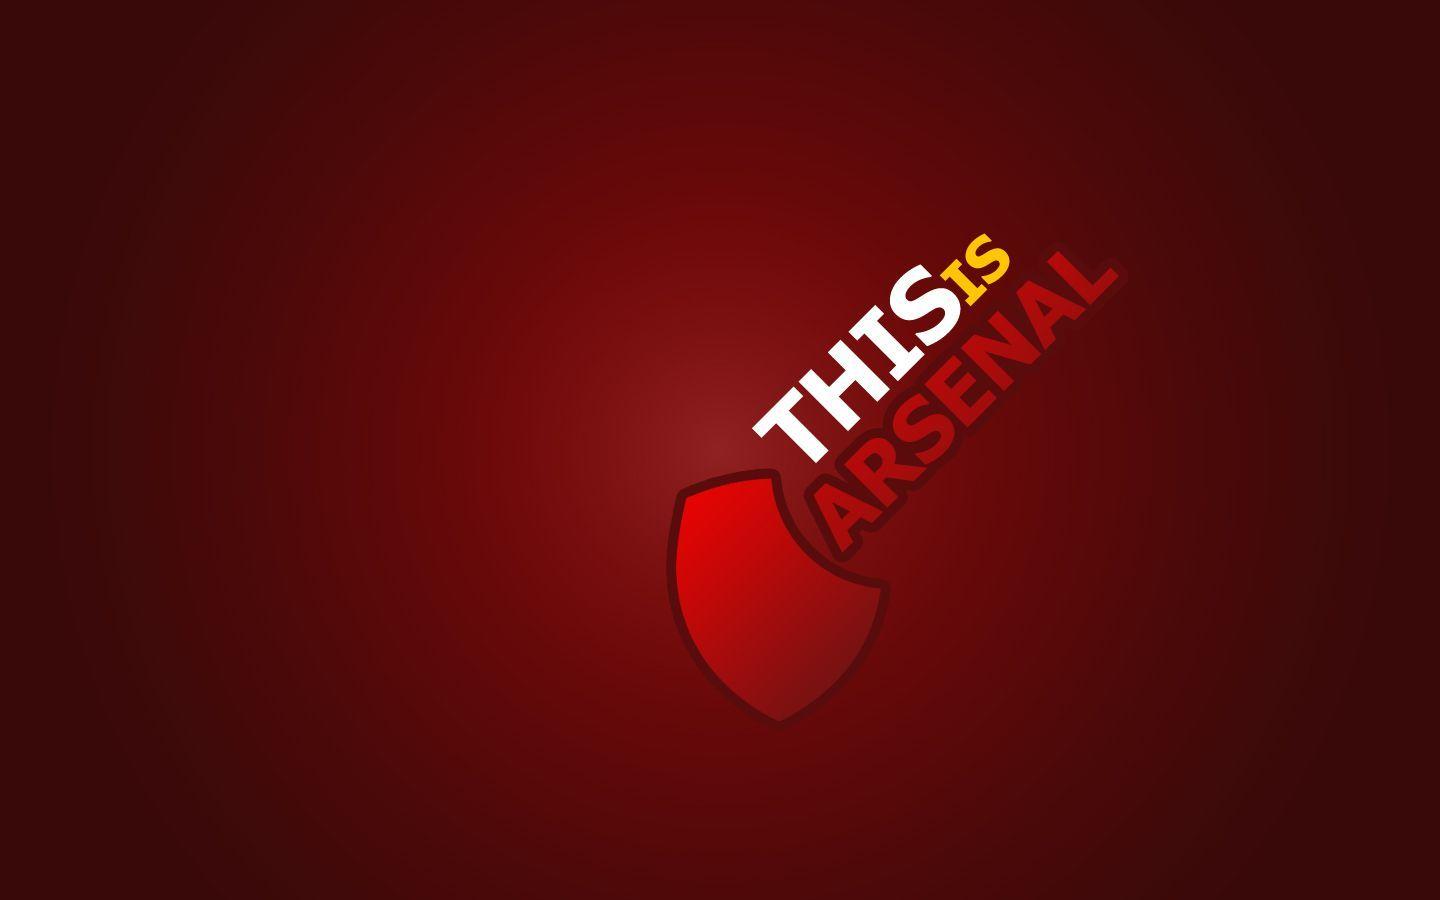 Arsenal HD Wallpaper for Desktop, iPhone, iPad, and Android